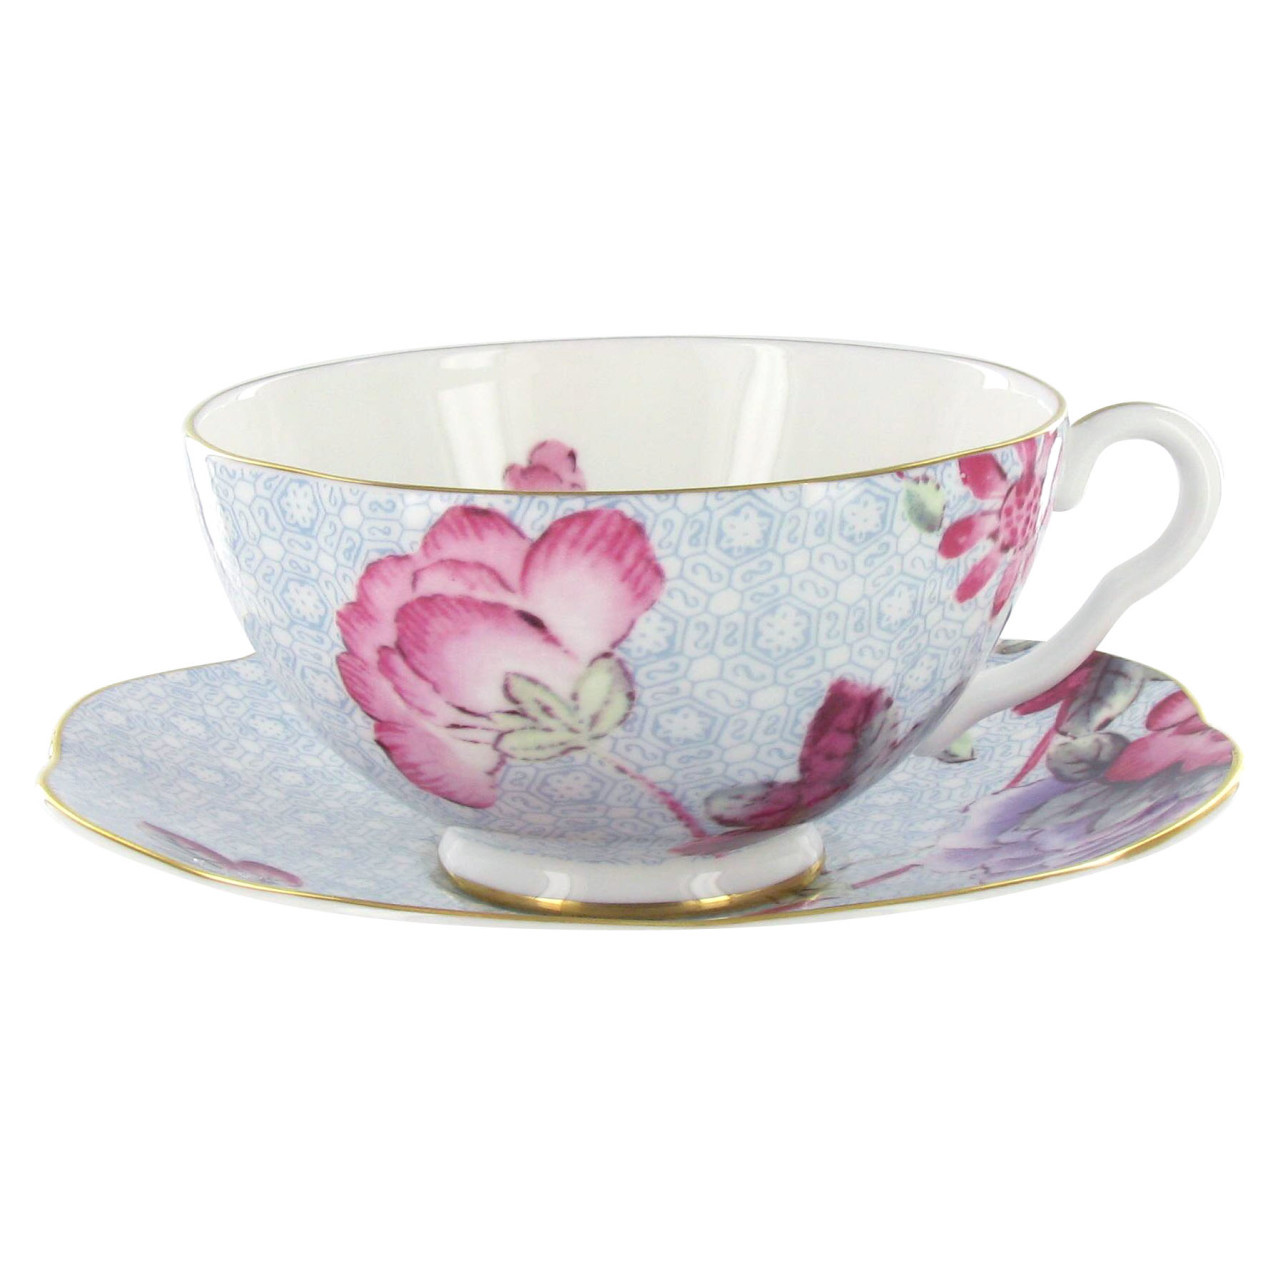 Wedgwood Harlequin Collection - Cuckoo - Tea Cup and Saucer - Blue